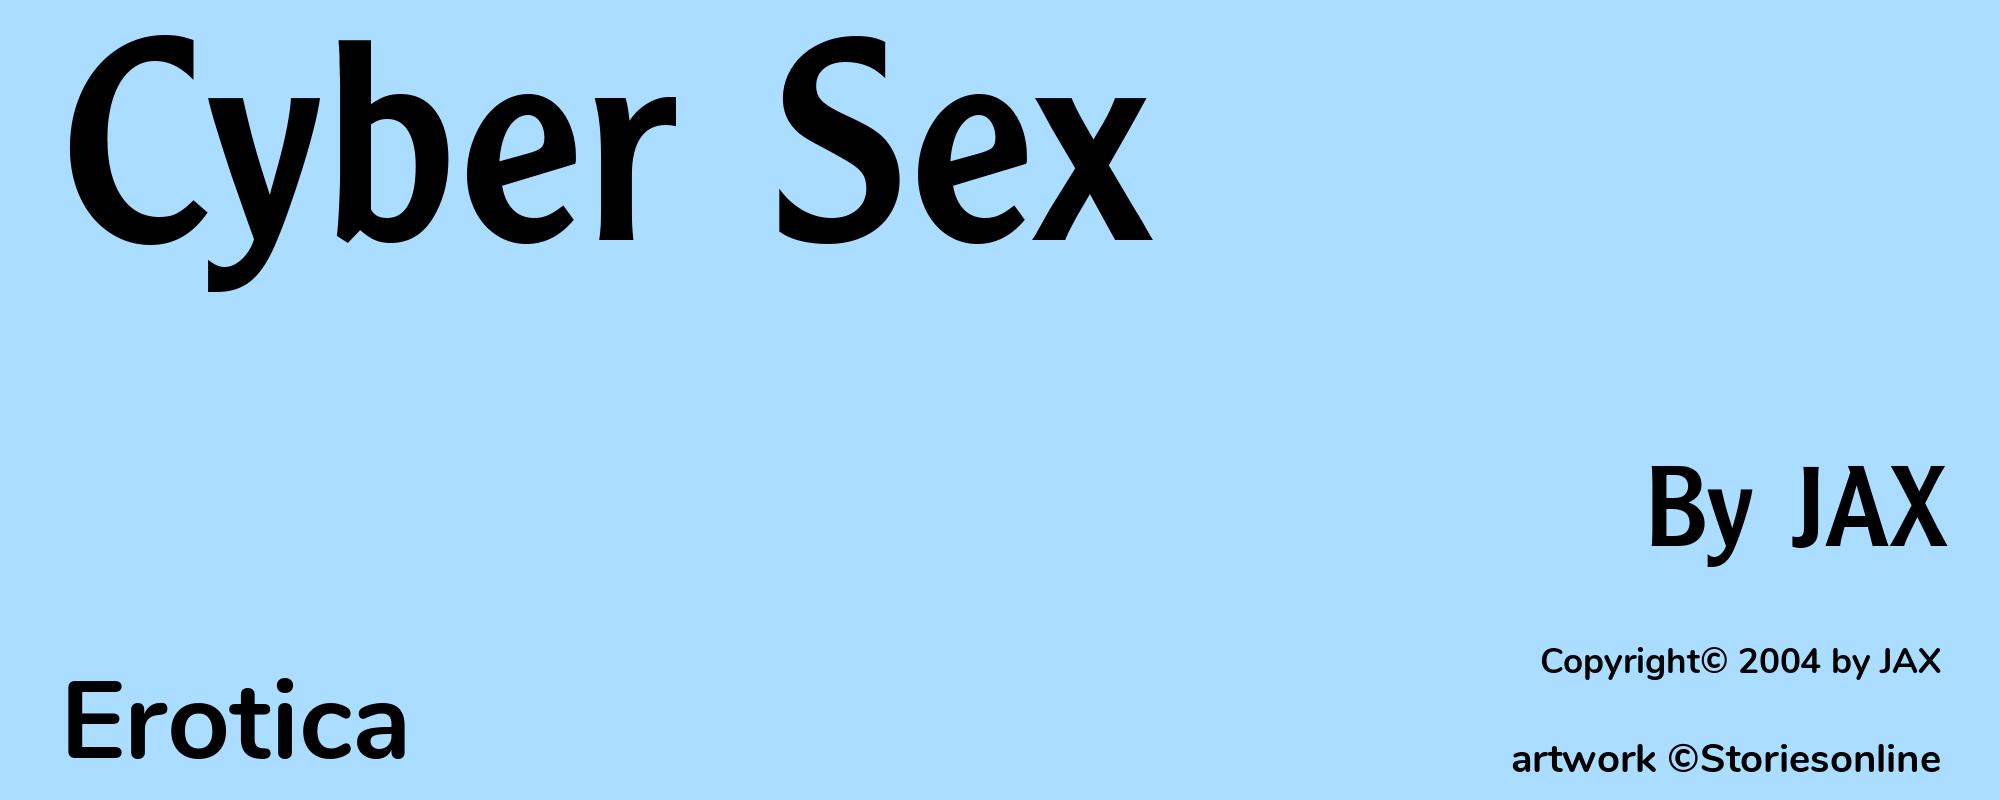 Cyber Sex - Cover